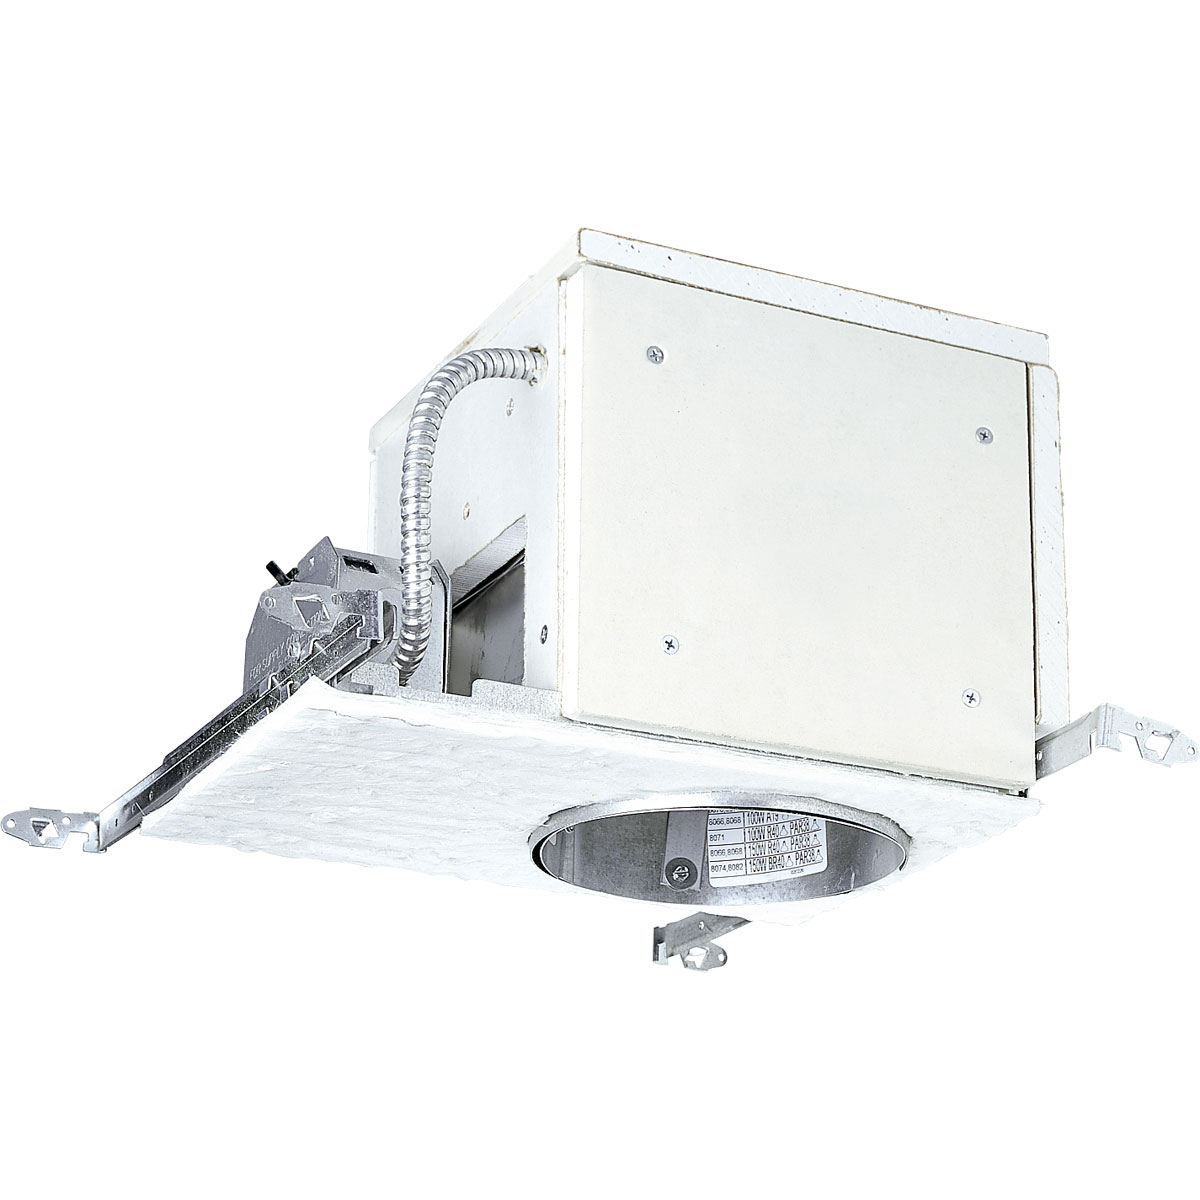 6 in Incandescent Firebox Air-Tight housing Will maintain up to a one-hour fire rating when installed in a UL L500 series non-IC fire rated floor/ceiling assembly.